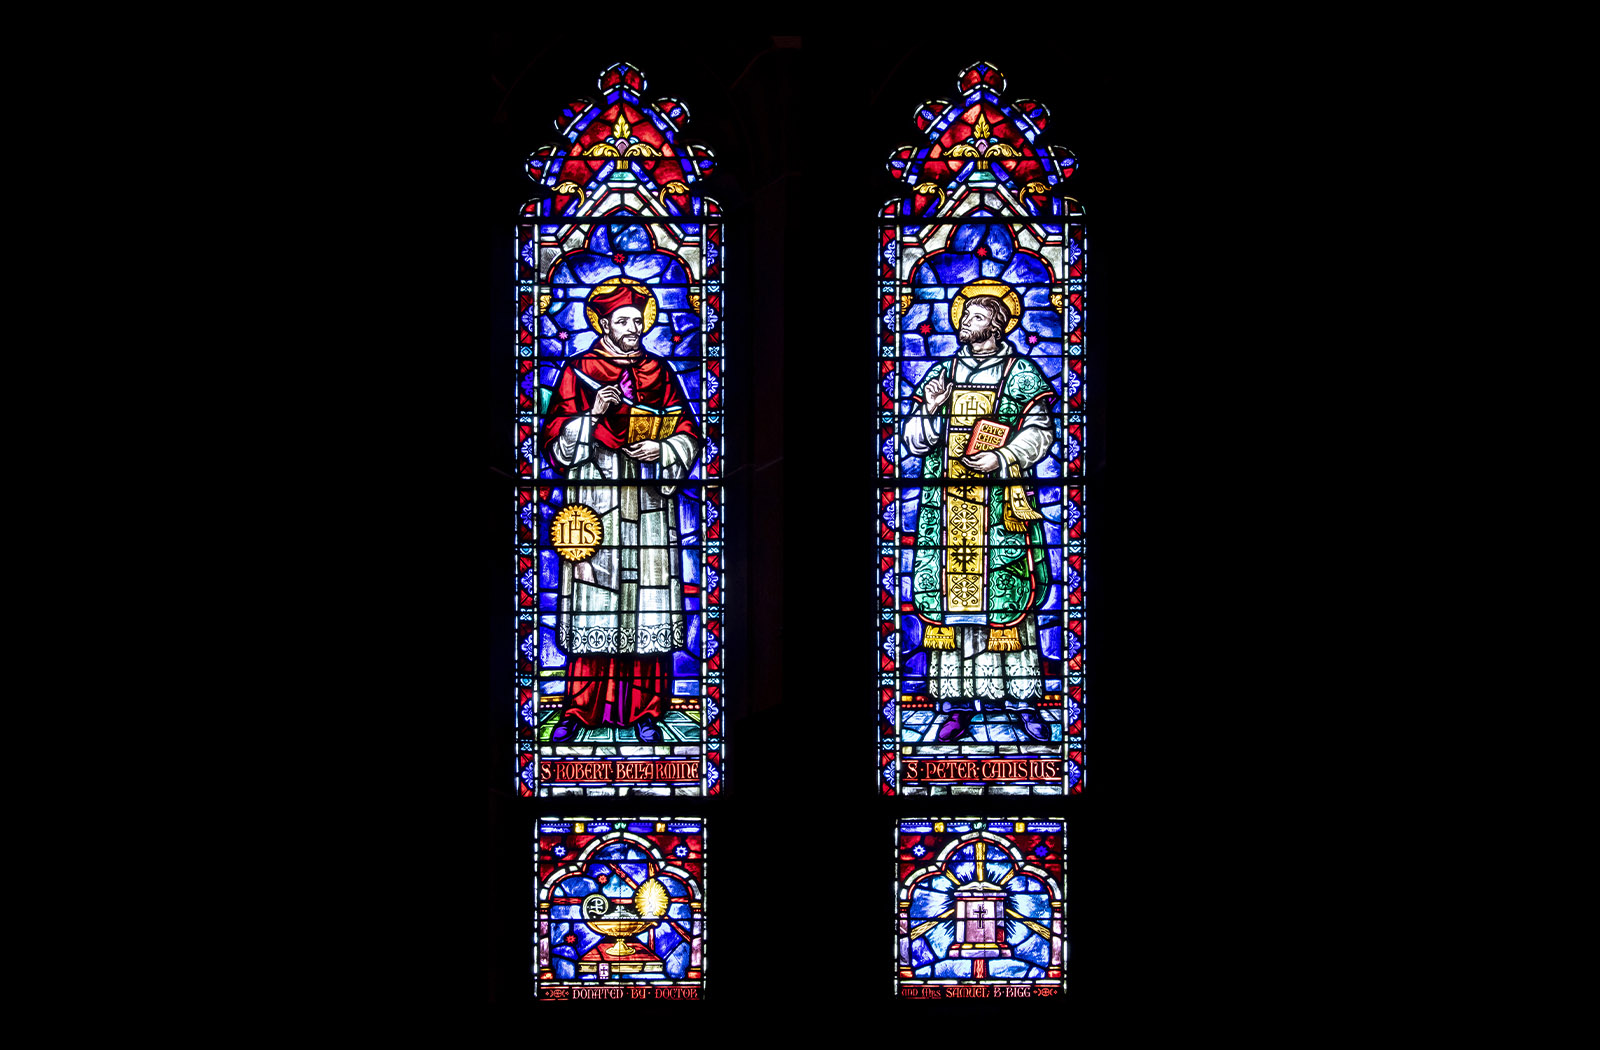 Two colorful stained glass panels of St. Robert Bellarmine and St. Peter Canisius